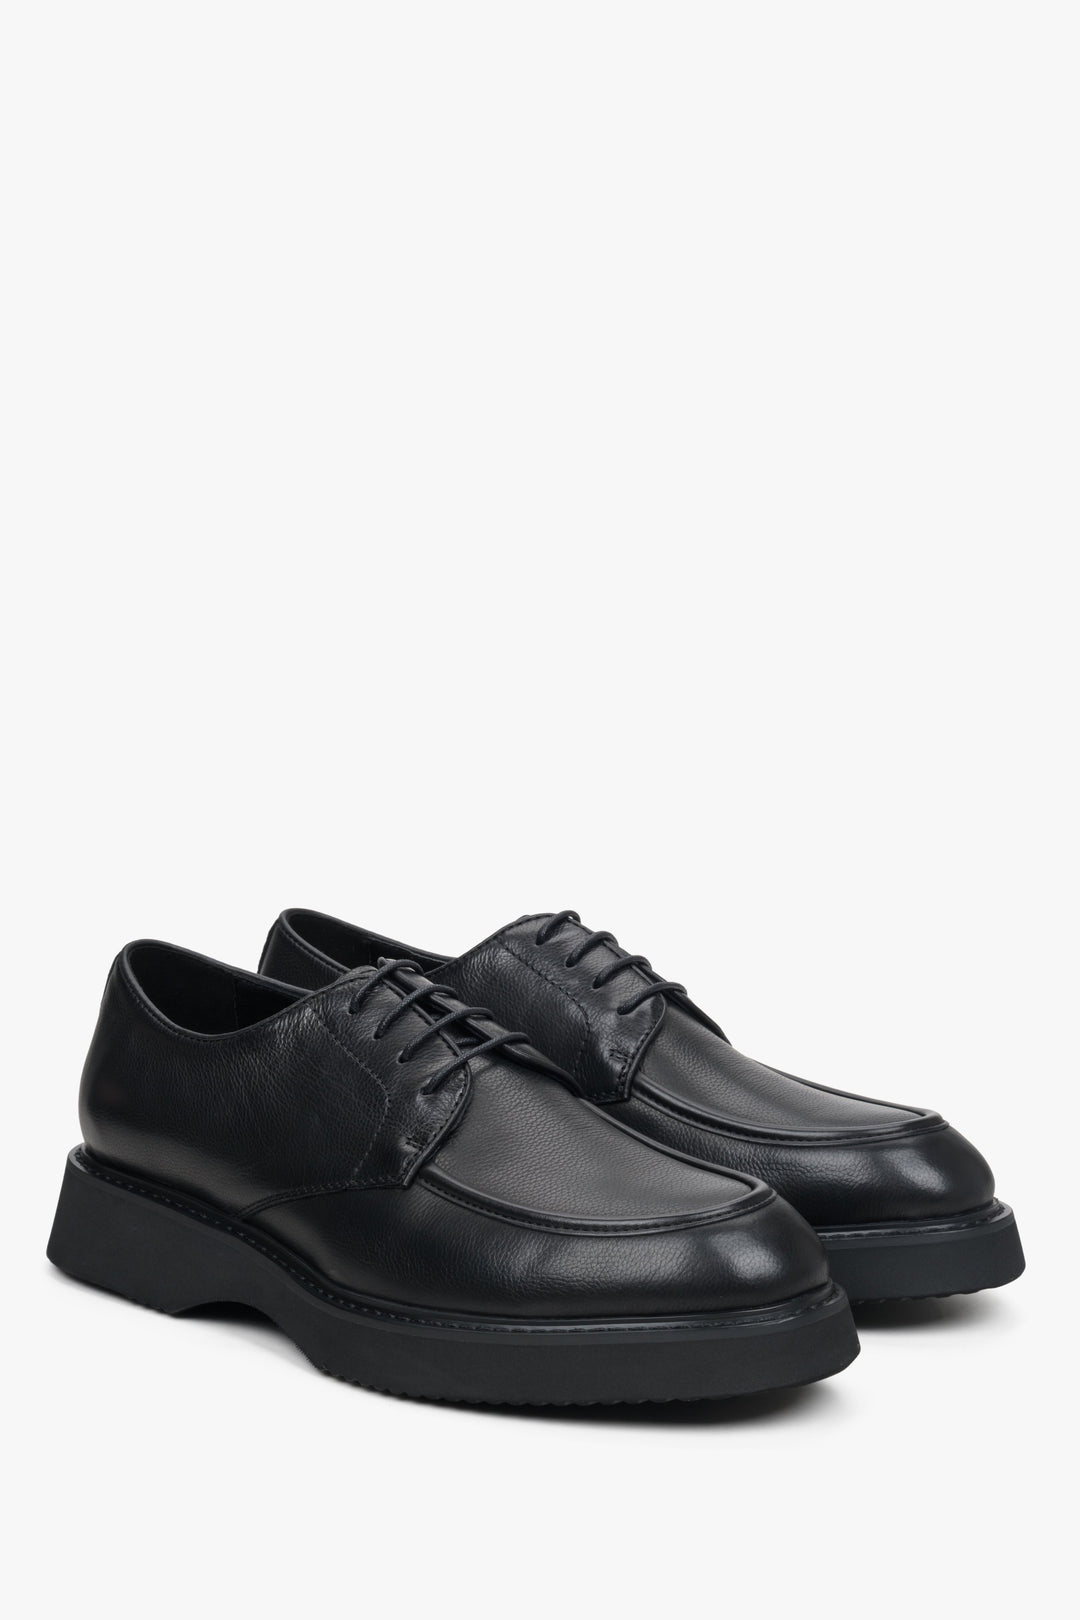 Lace-up brogues made of black genuine suede leather by Estro.